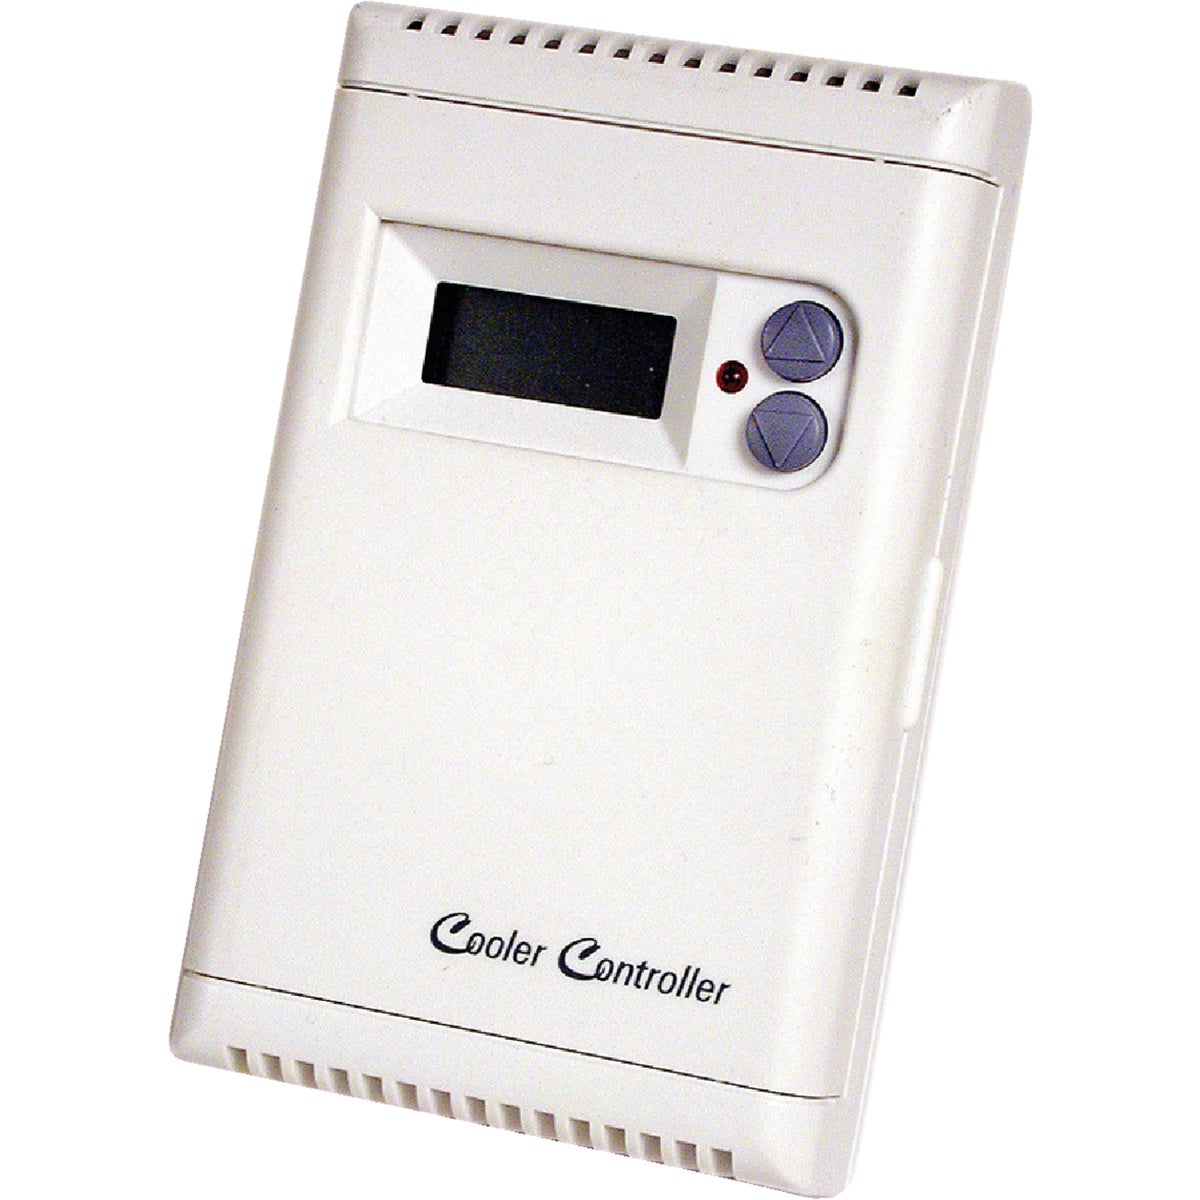 Item 455224, The Evaporative Cooler Digital Controller automatically turns an 